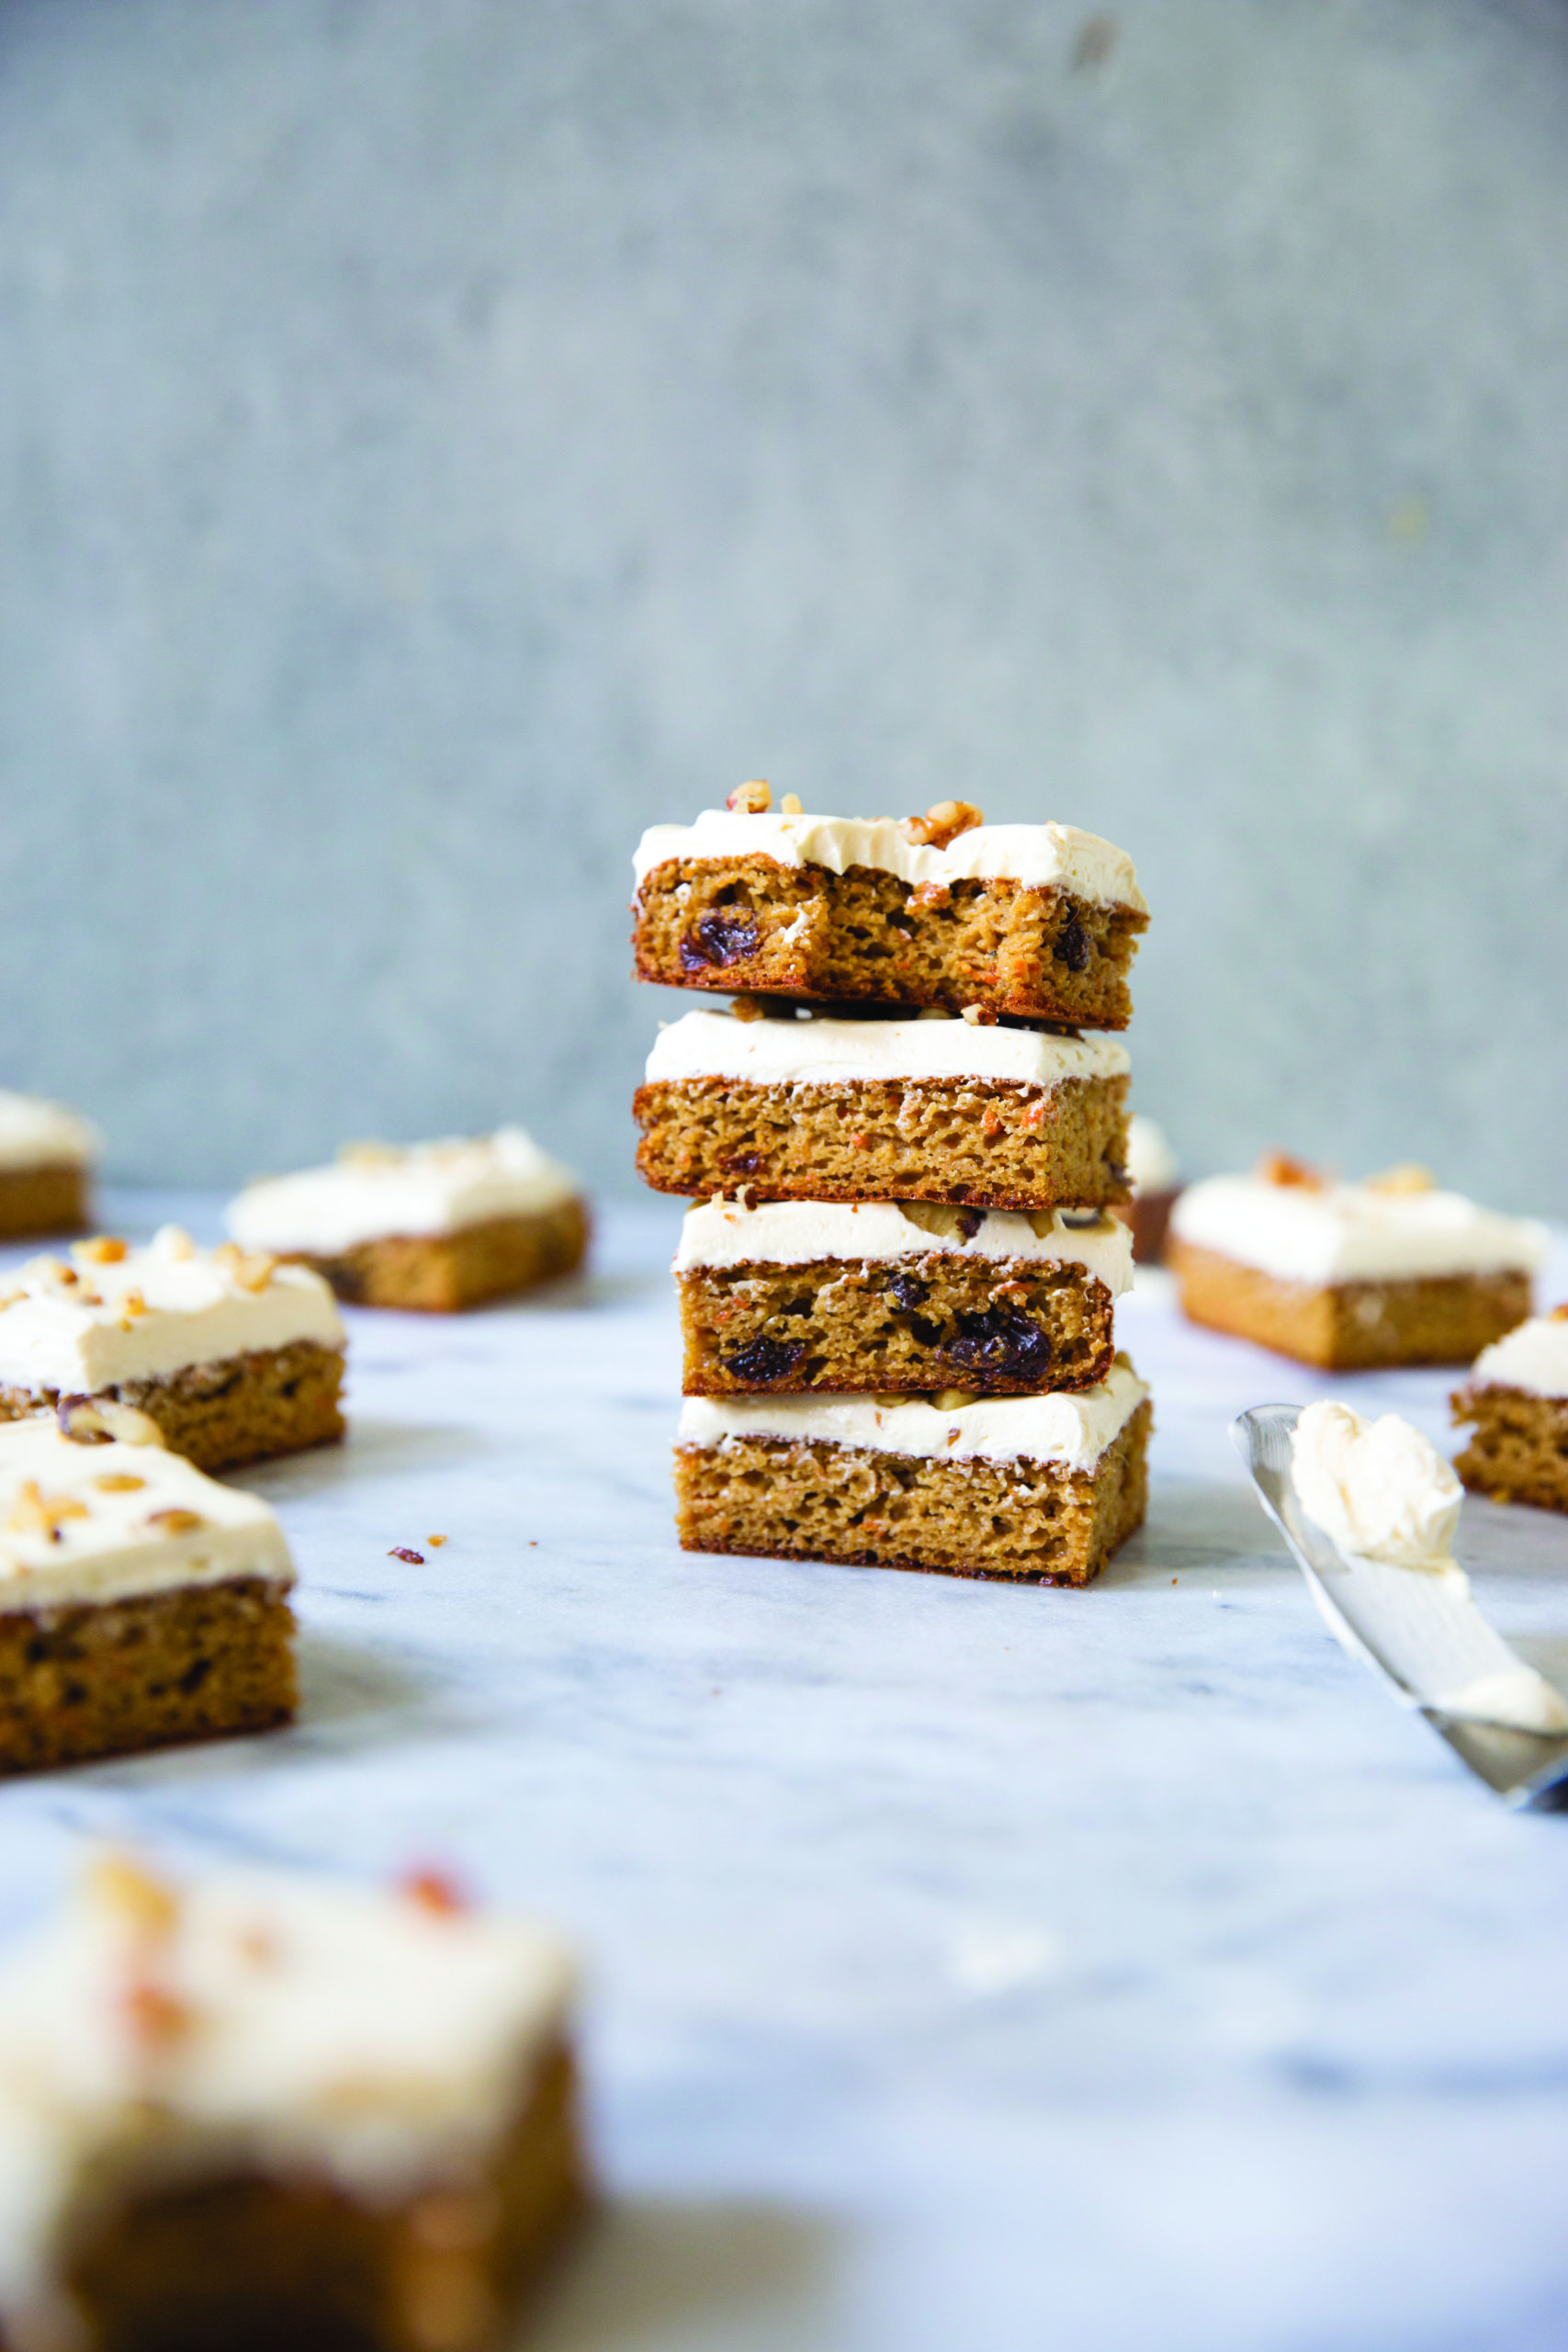 These healthy carrot cake bars make the perfect treat! Gluten-free and Paleo, you will love the warm comforting spice and the rich taste of fall in each bite.